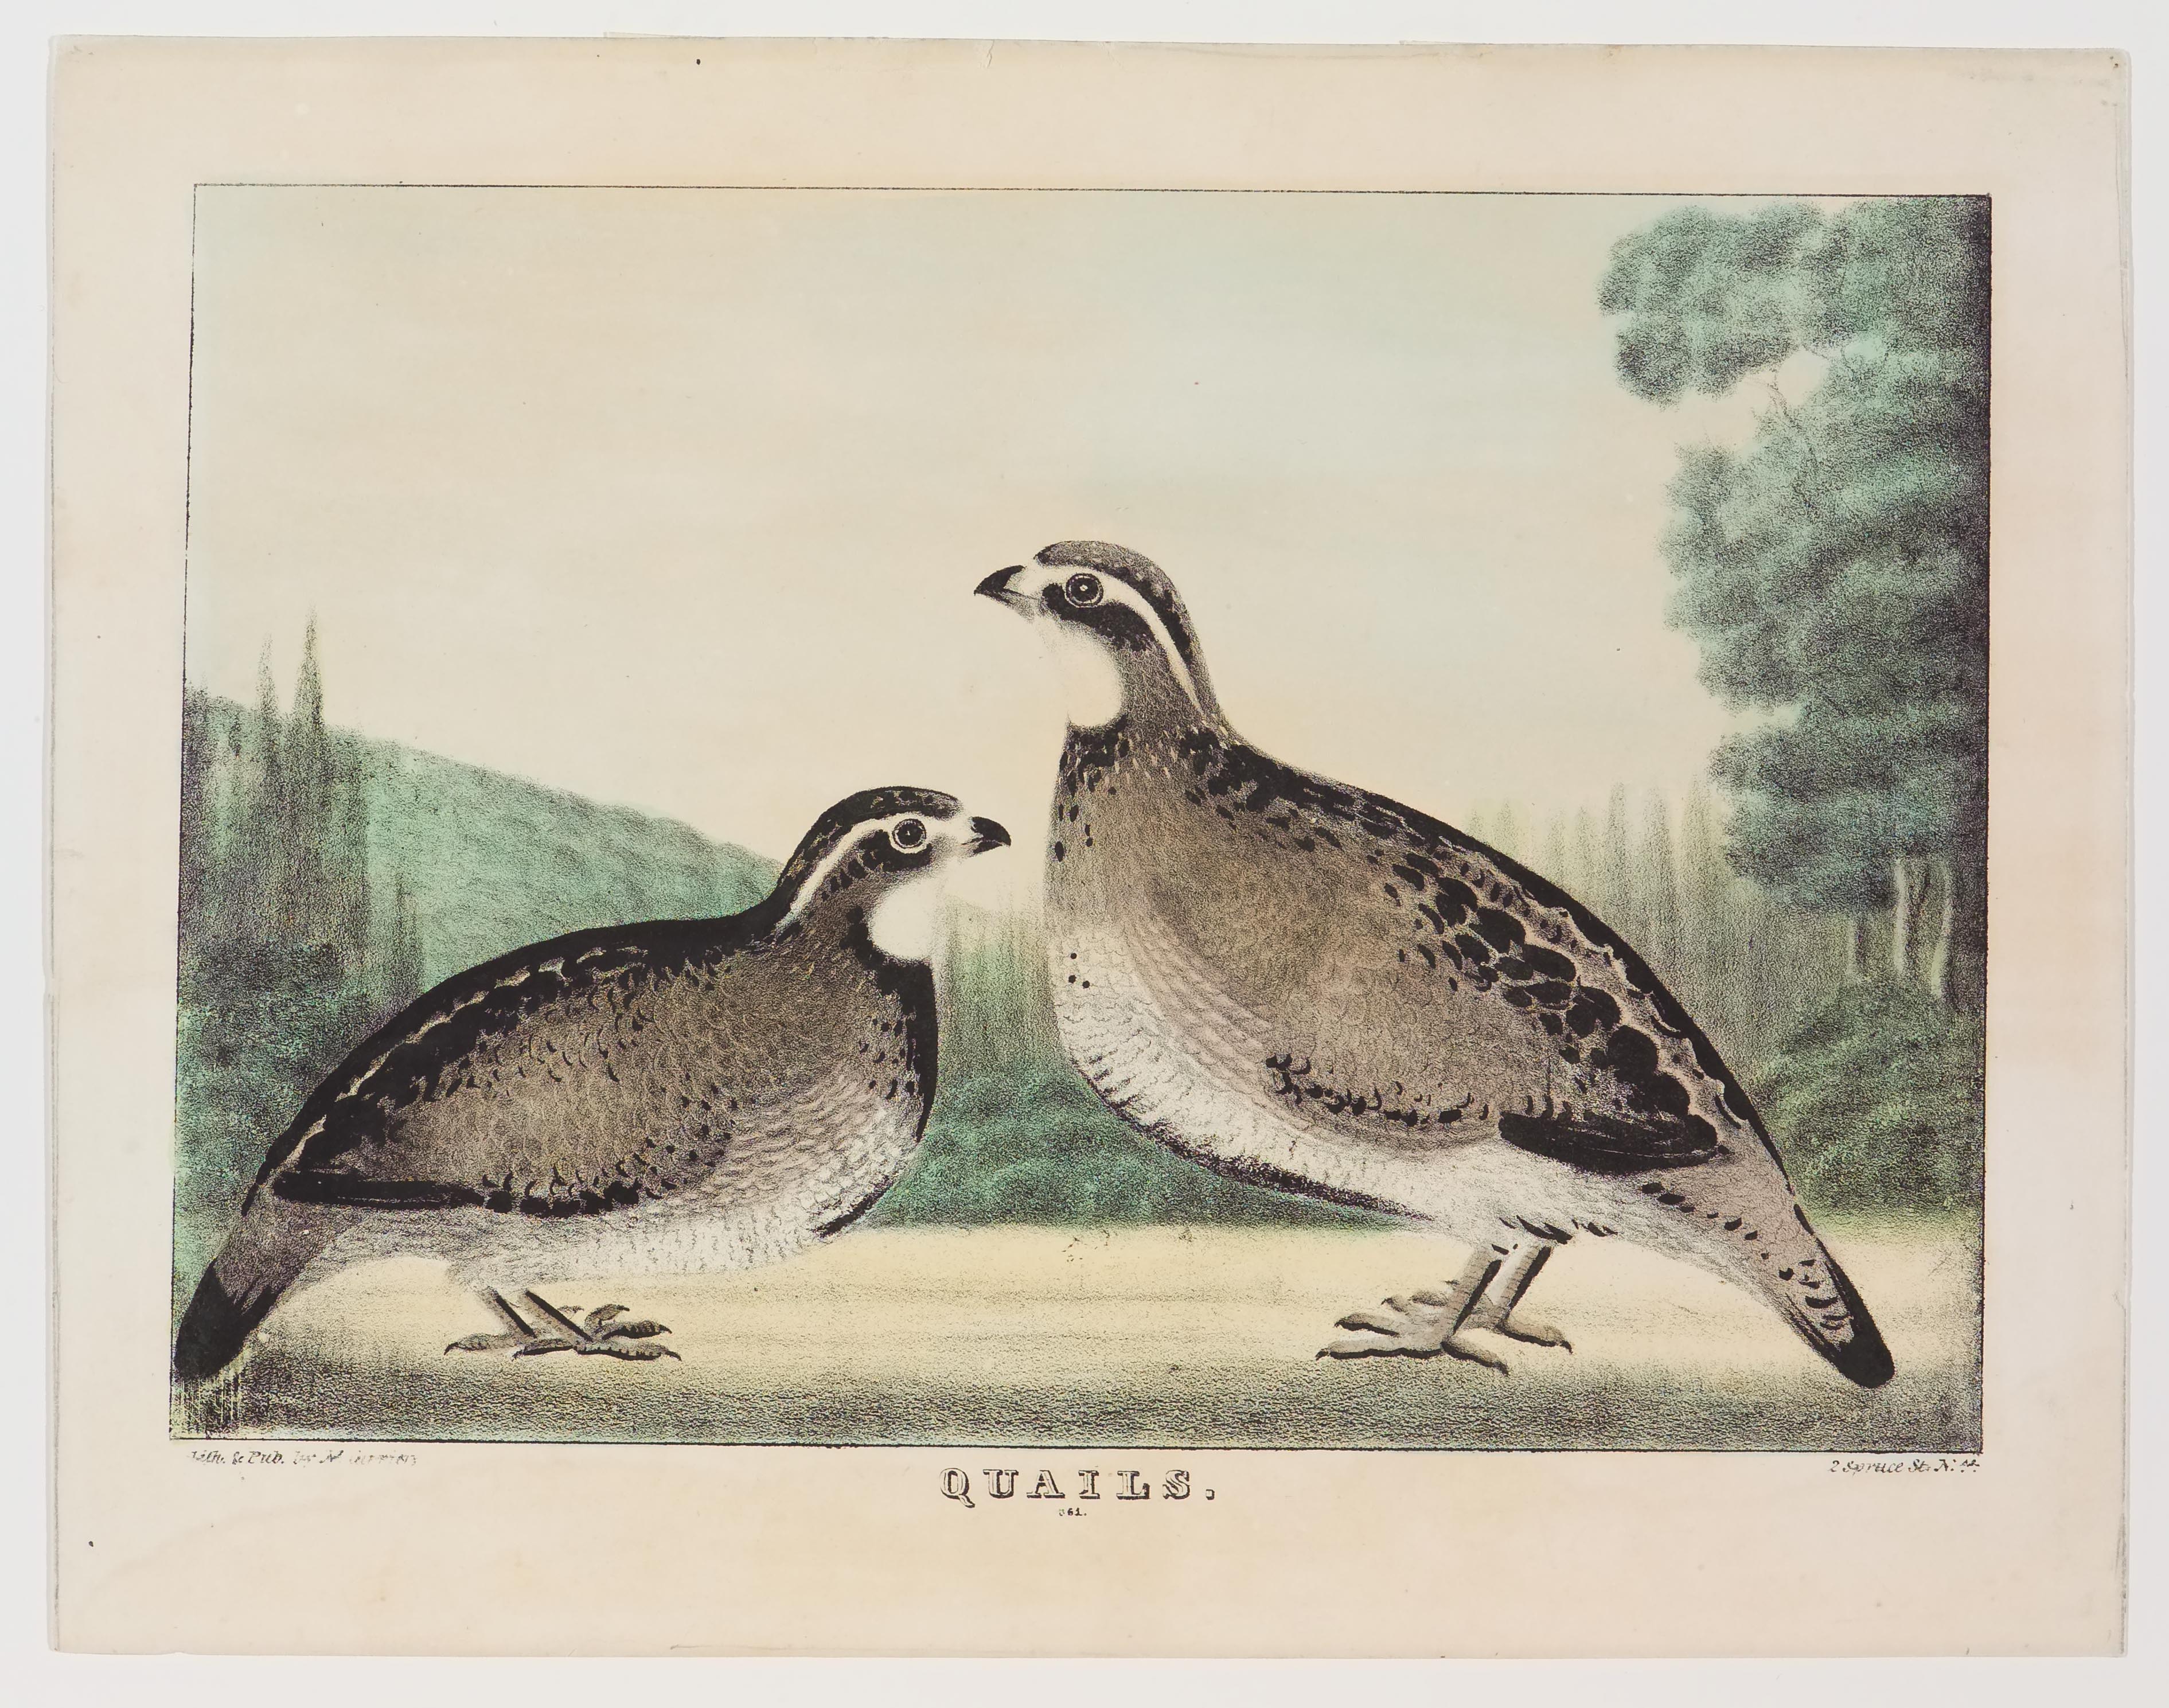 Two quails facing center and each other - hillside left background